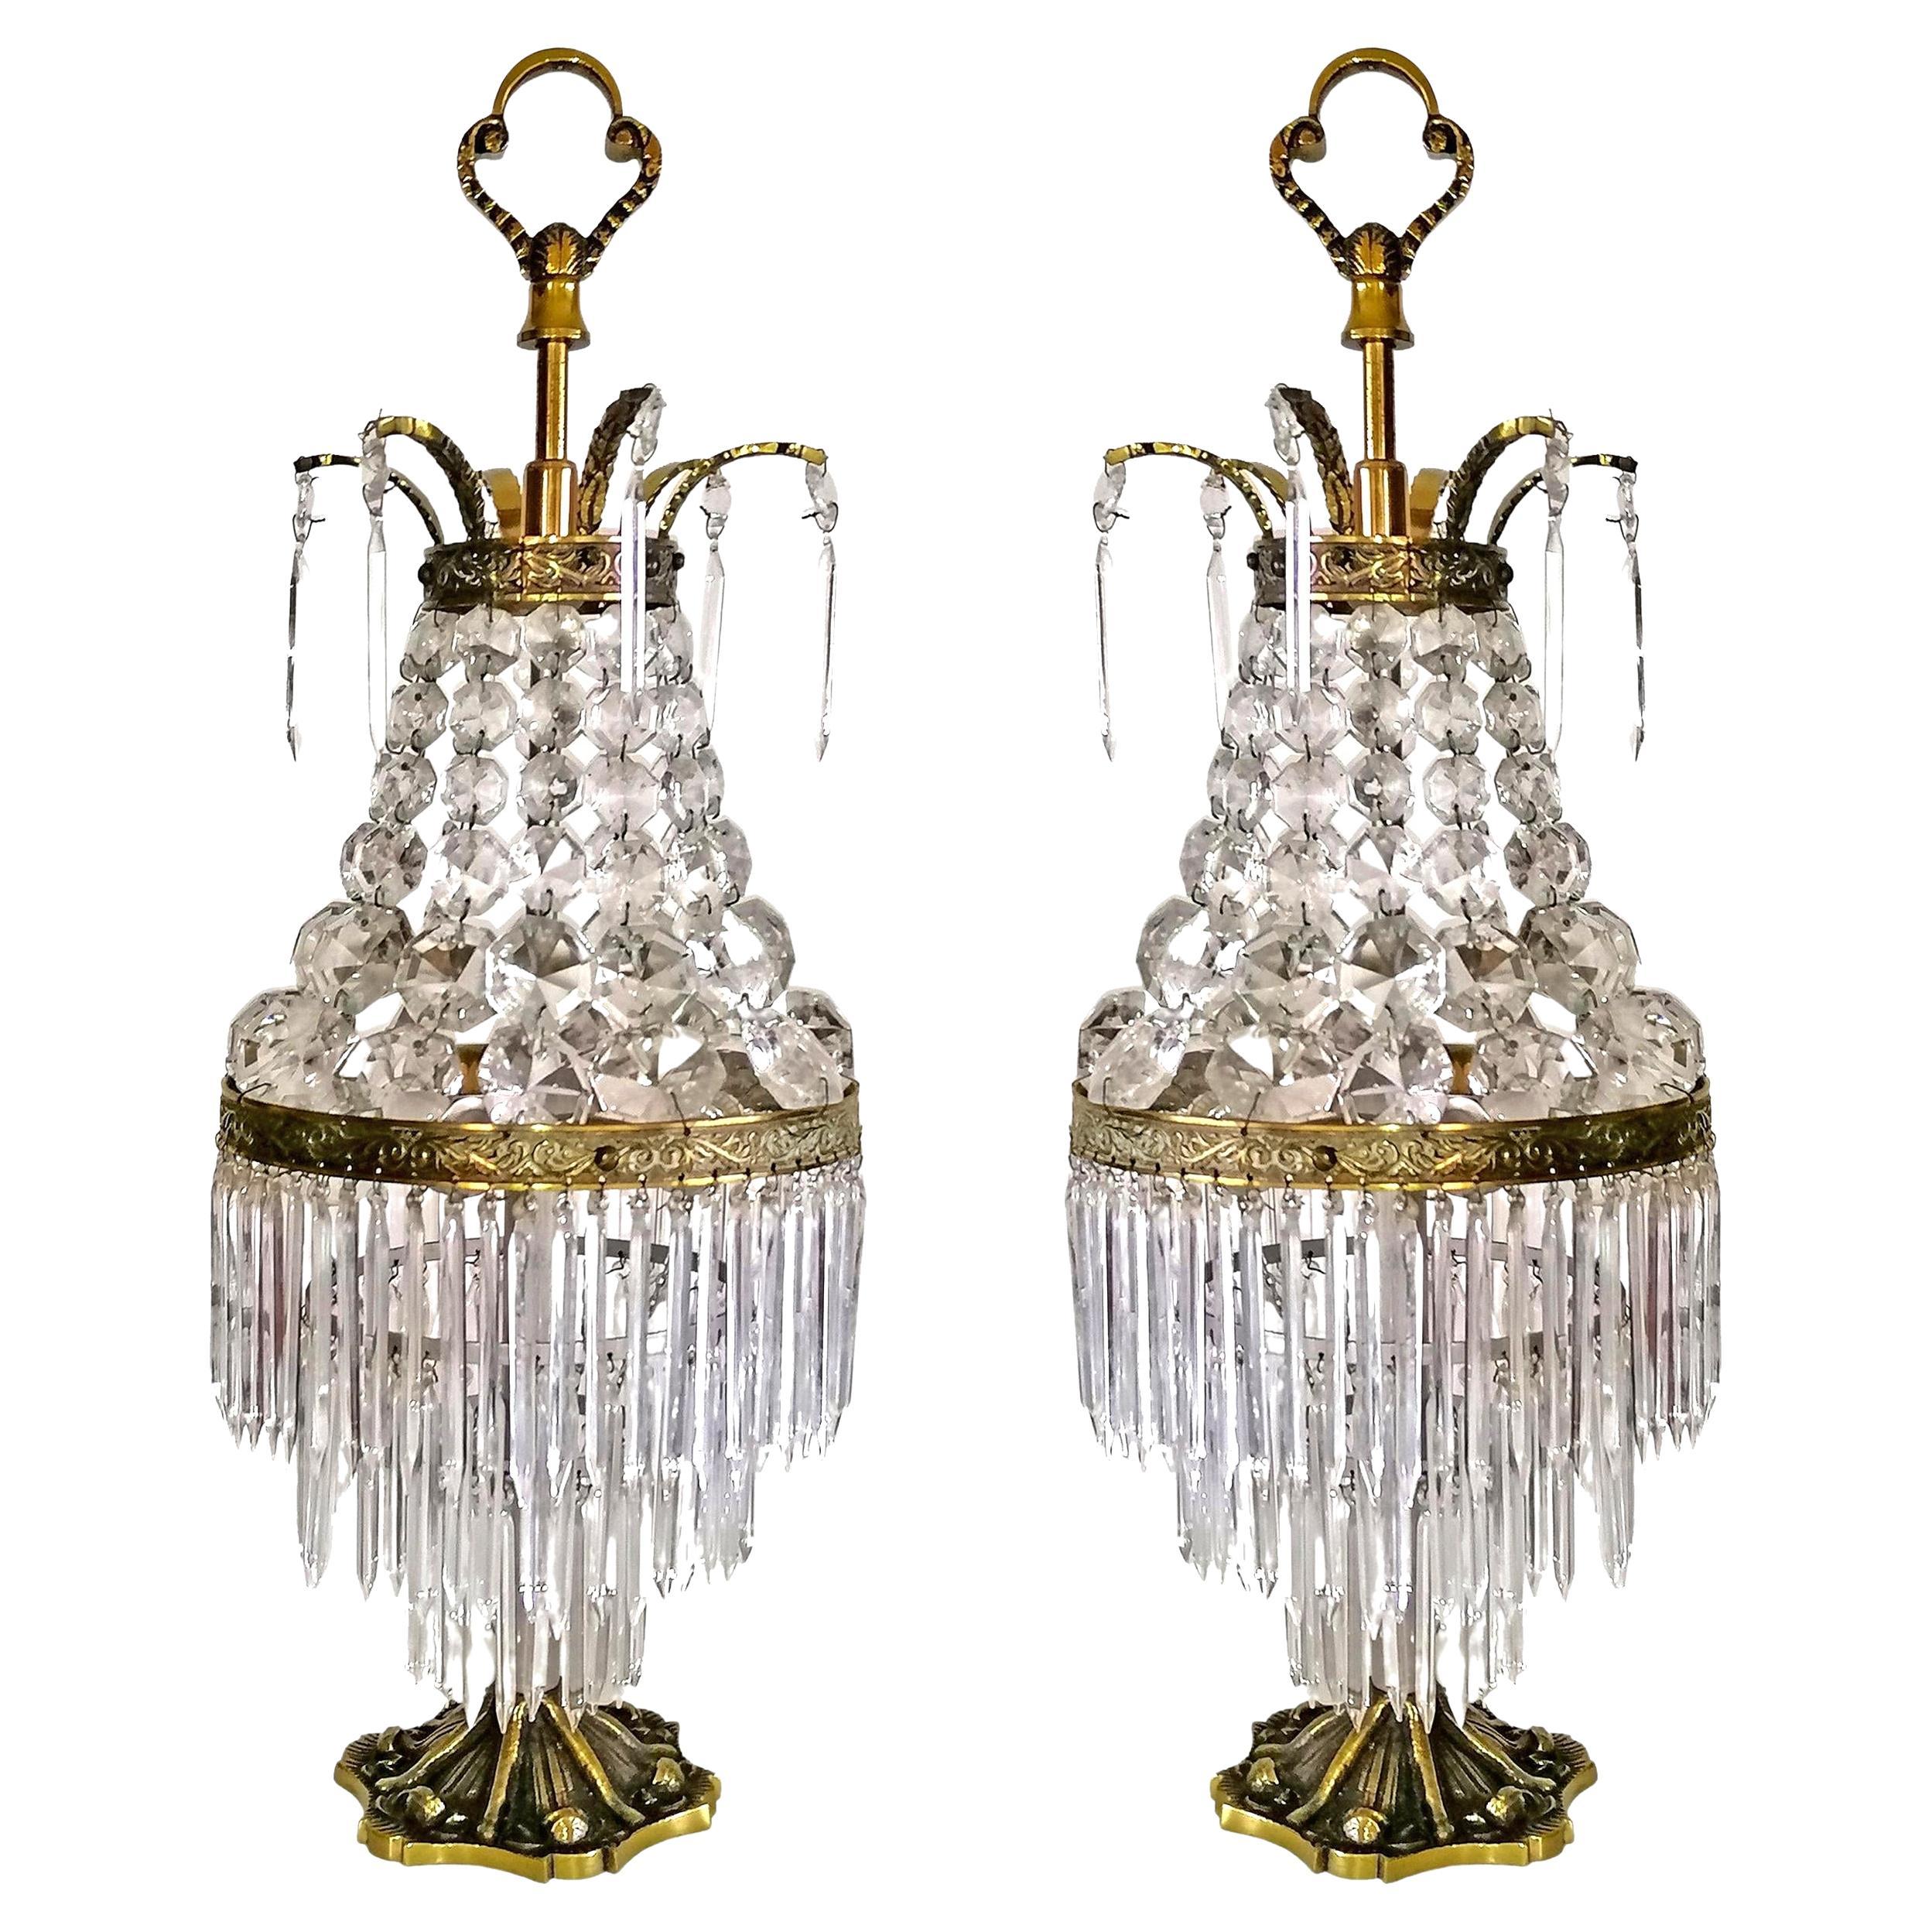 Pair of French Regency Empire Table Lamps in Gilt Bronze and Crystal